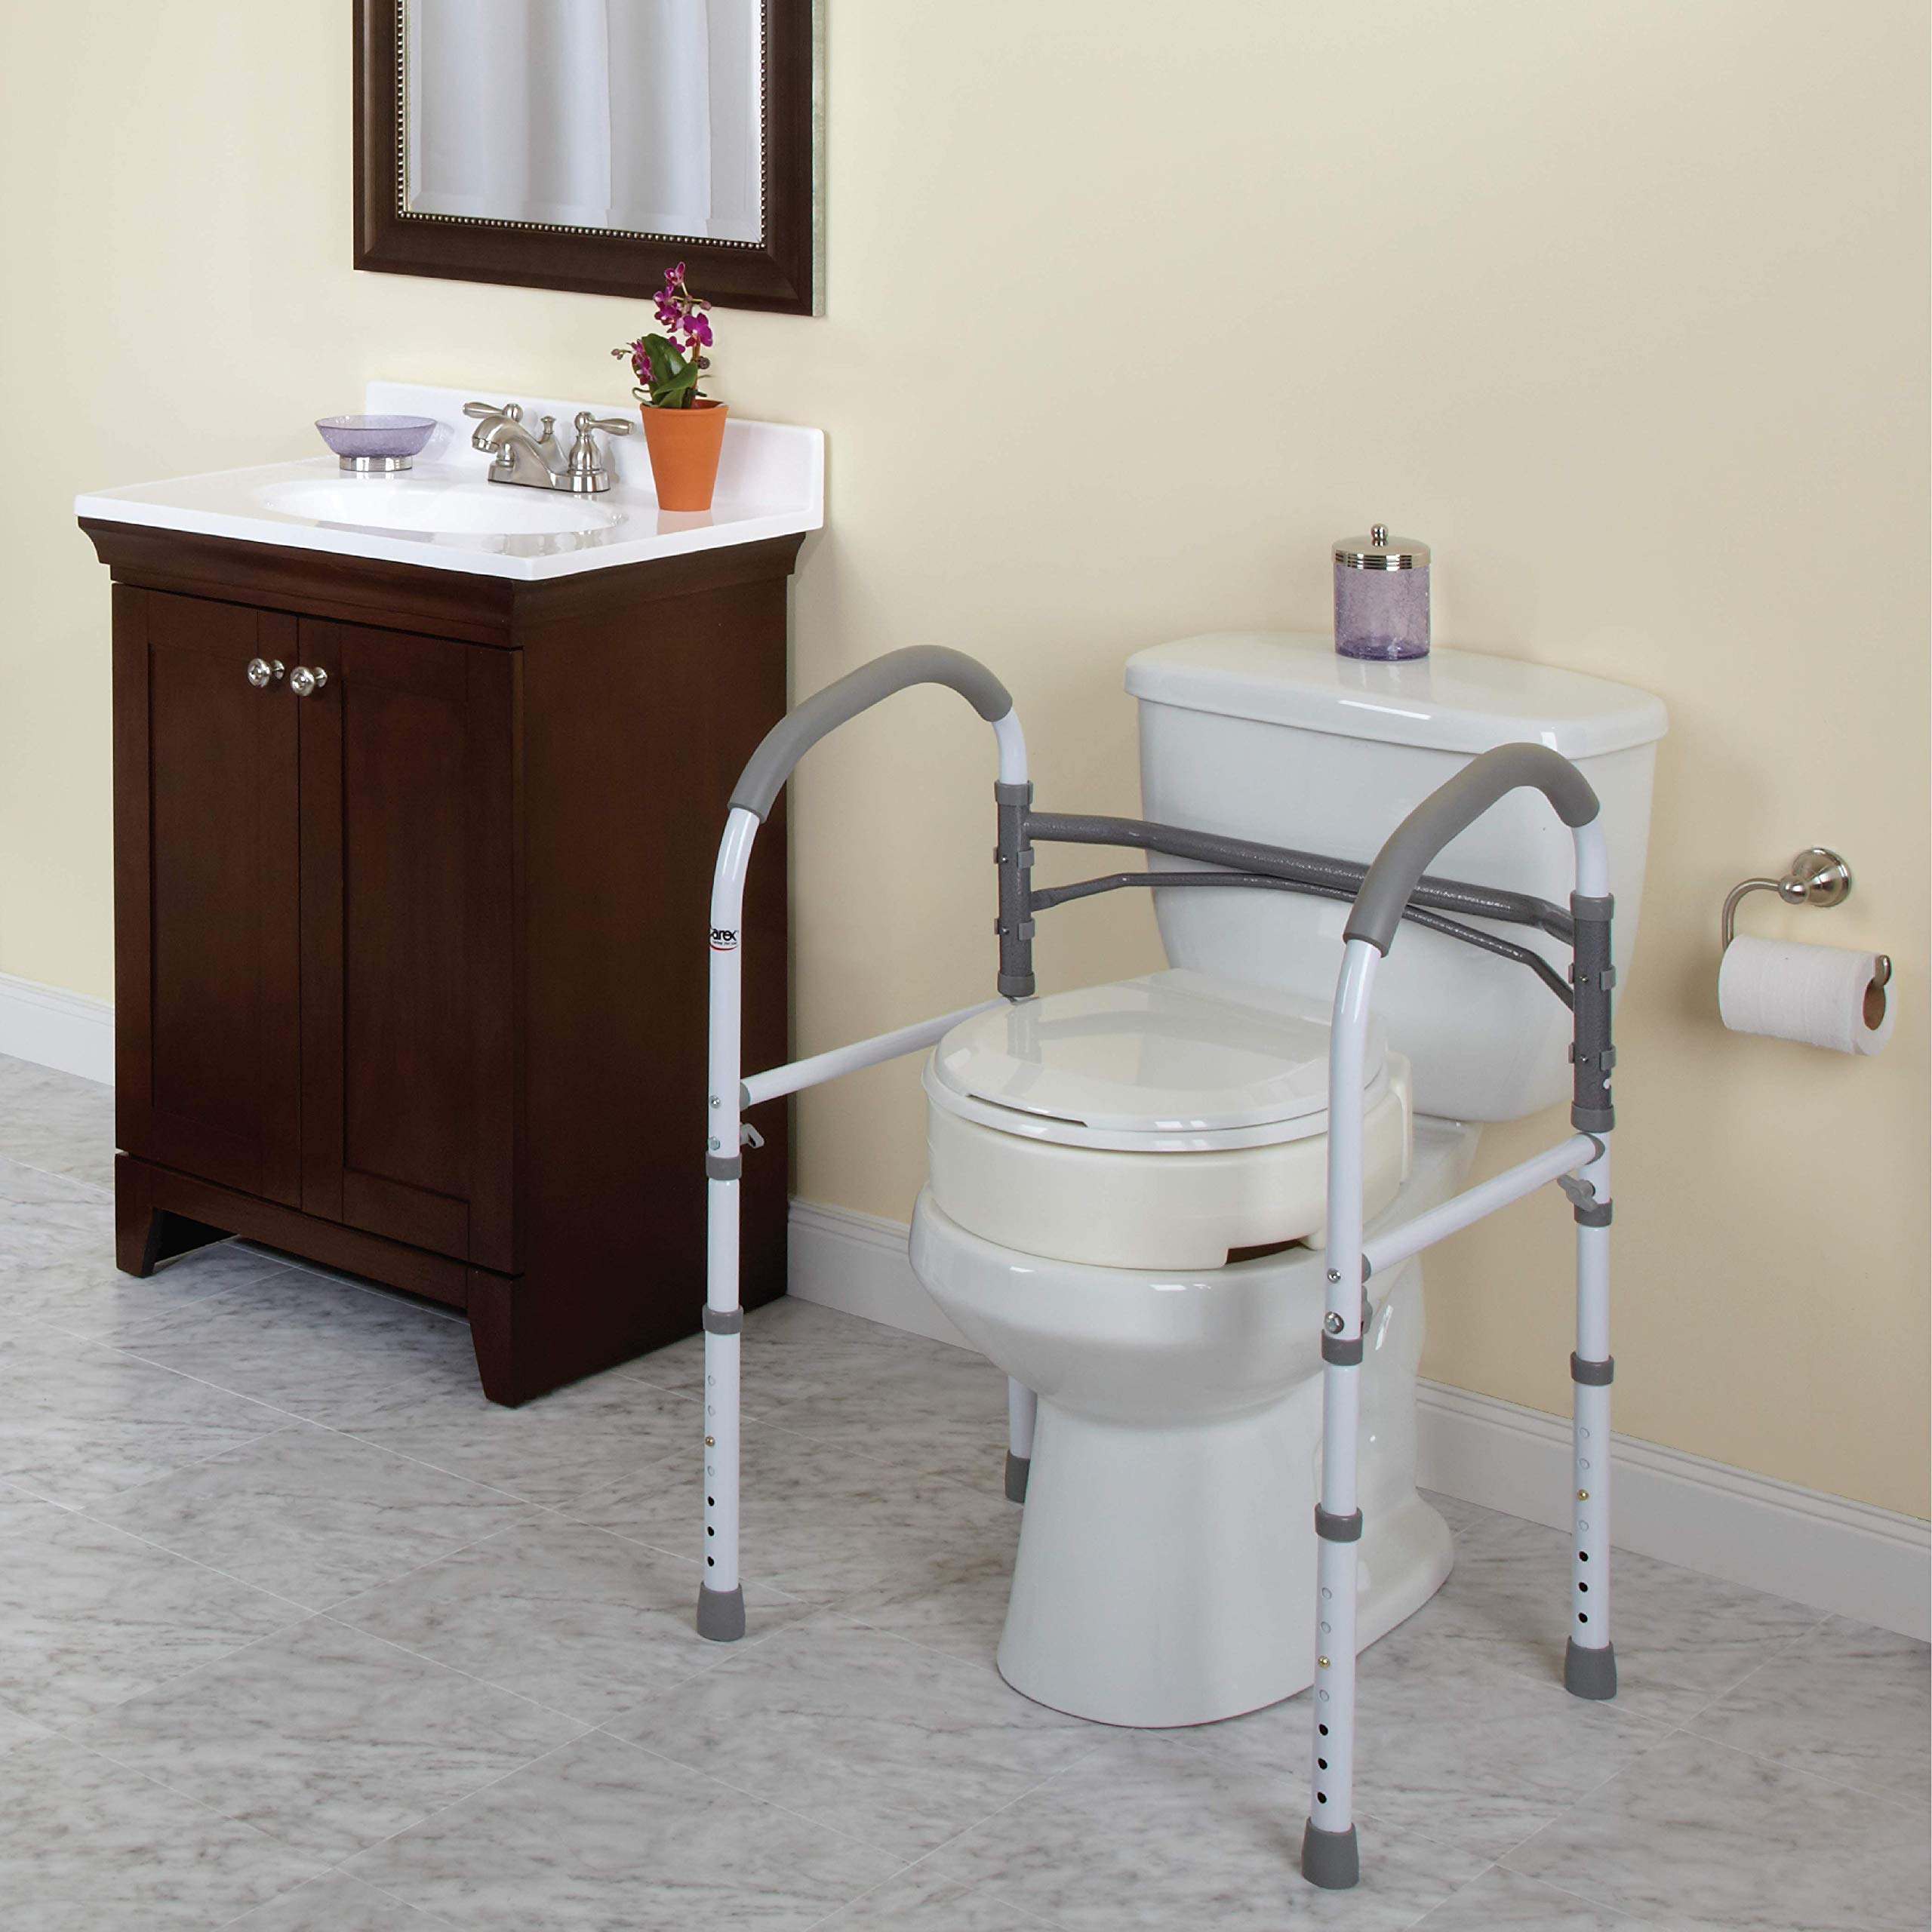 Carex Toilet Safety Rails - Toilet Handles for Elderly and Handicap Toilet Safety Rails, Toilet Safety Frame, Toilet Rails for Elderly and Toilet Bars for Elderly and Disabled